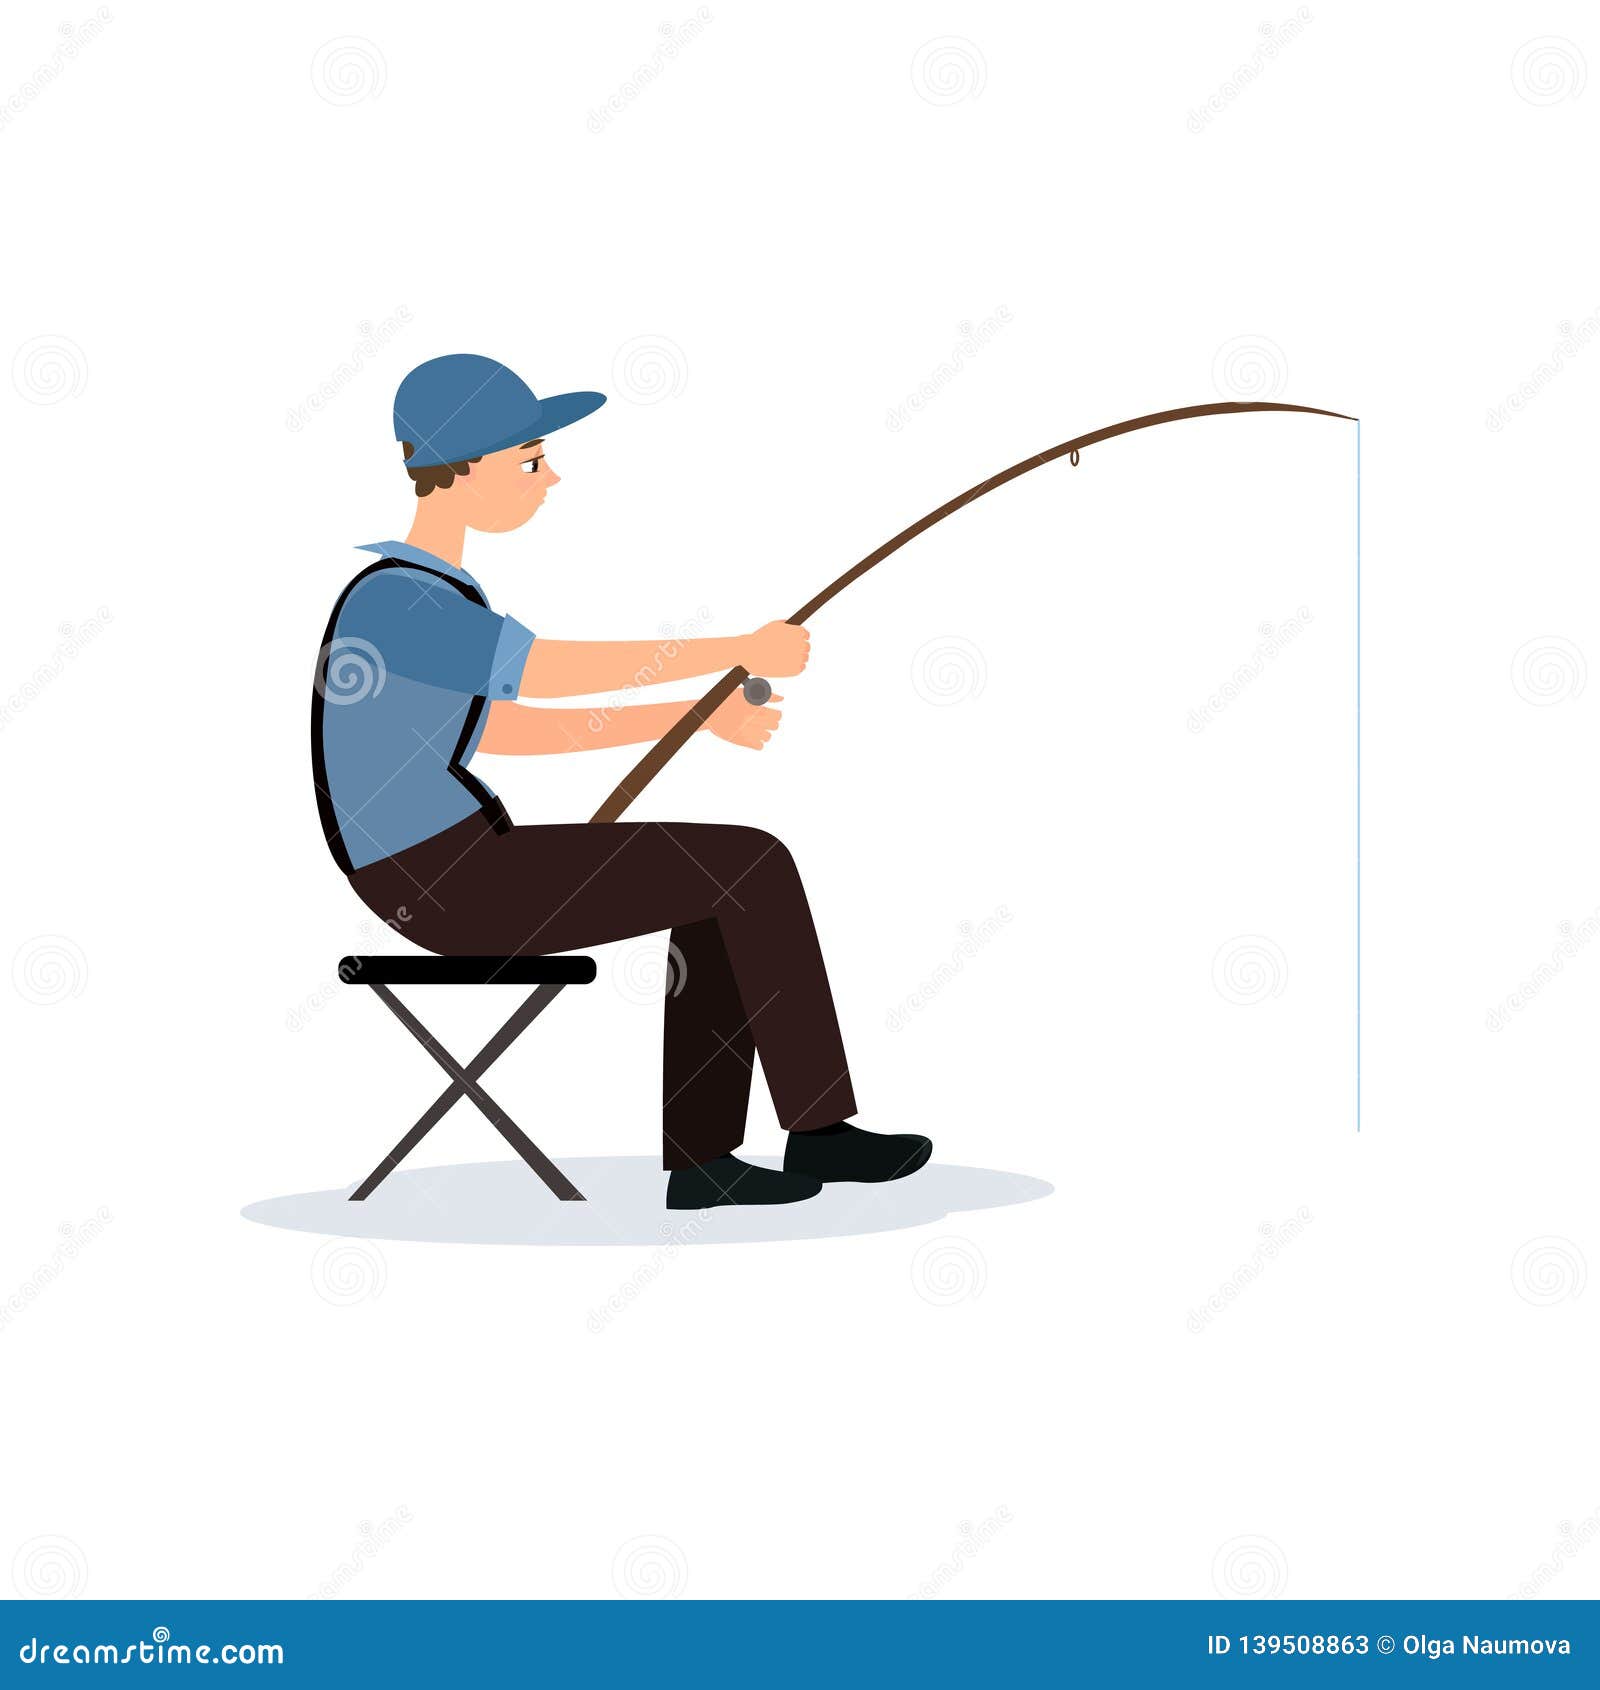 Fisherman Sitting on Folding Chair with Fishing Rod, Male Fisher